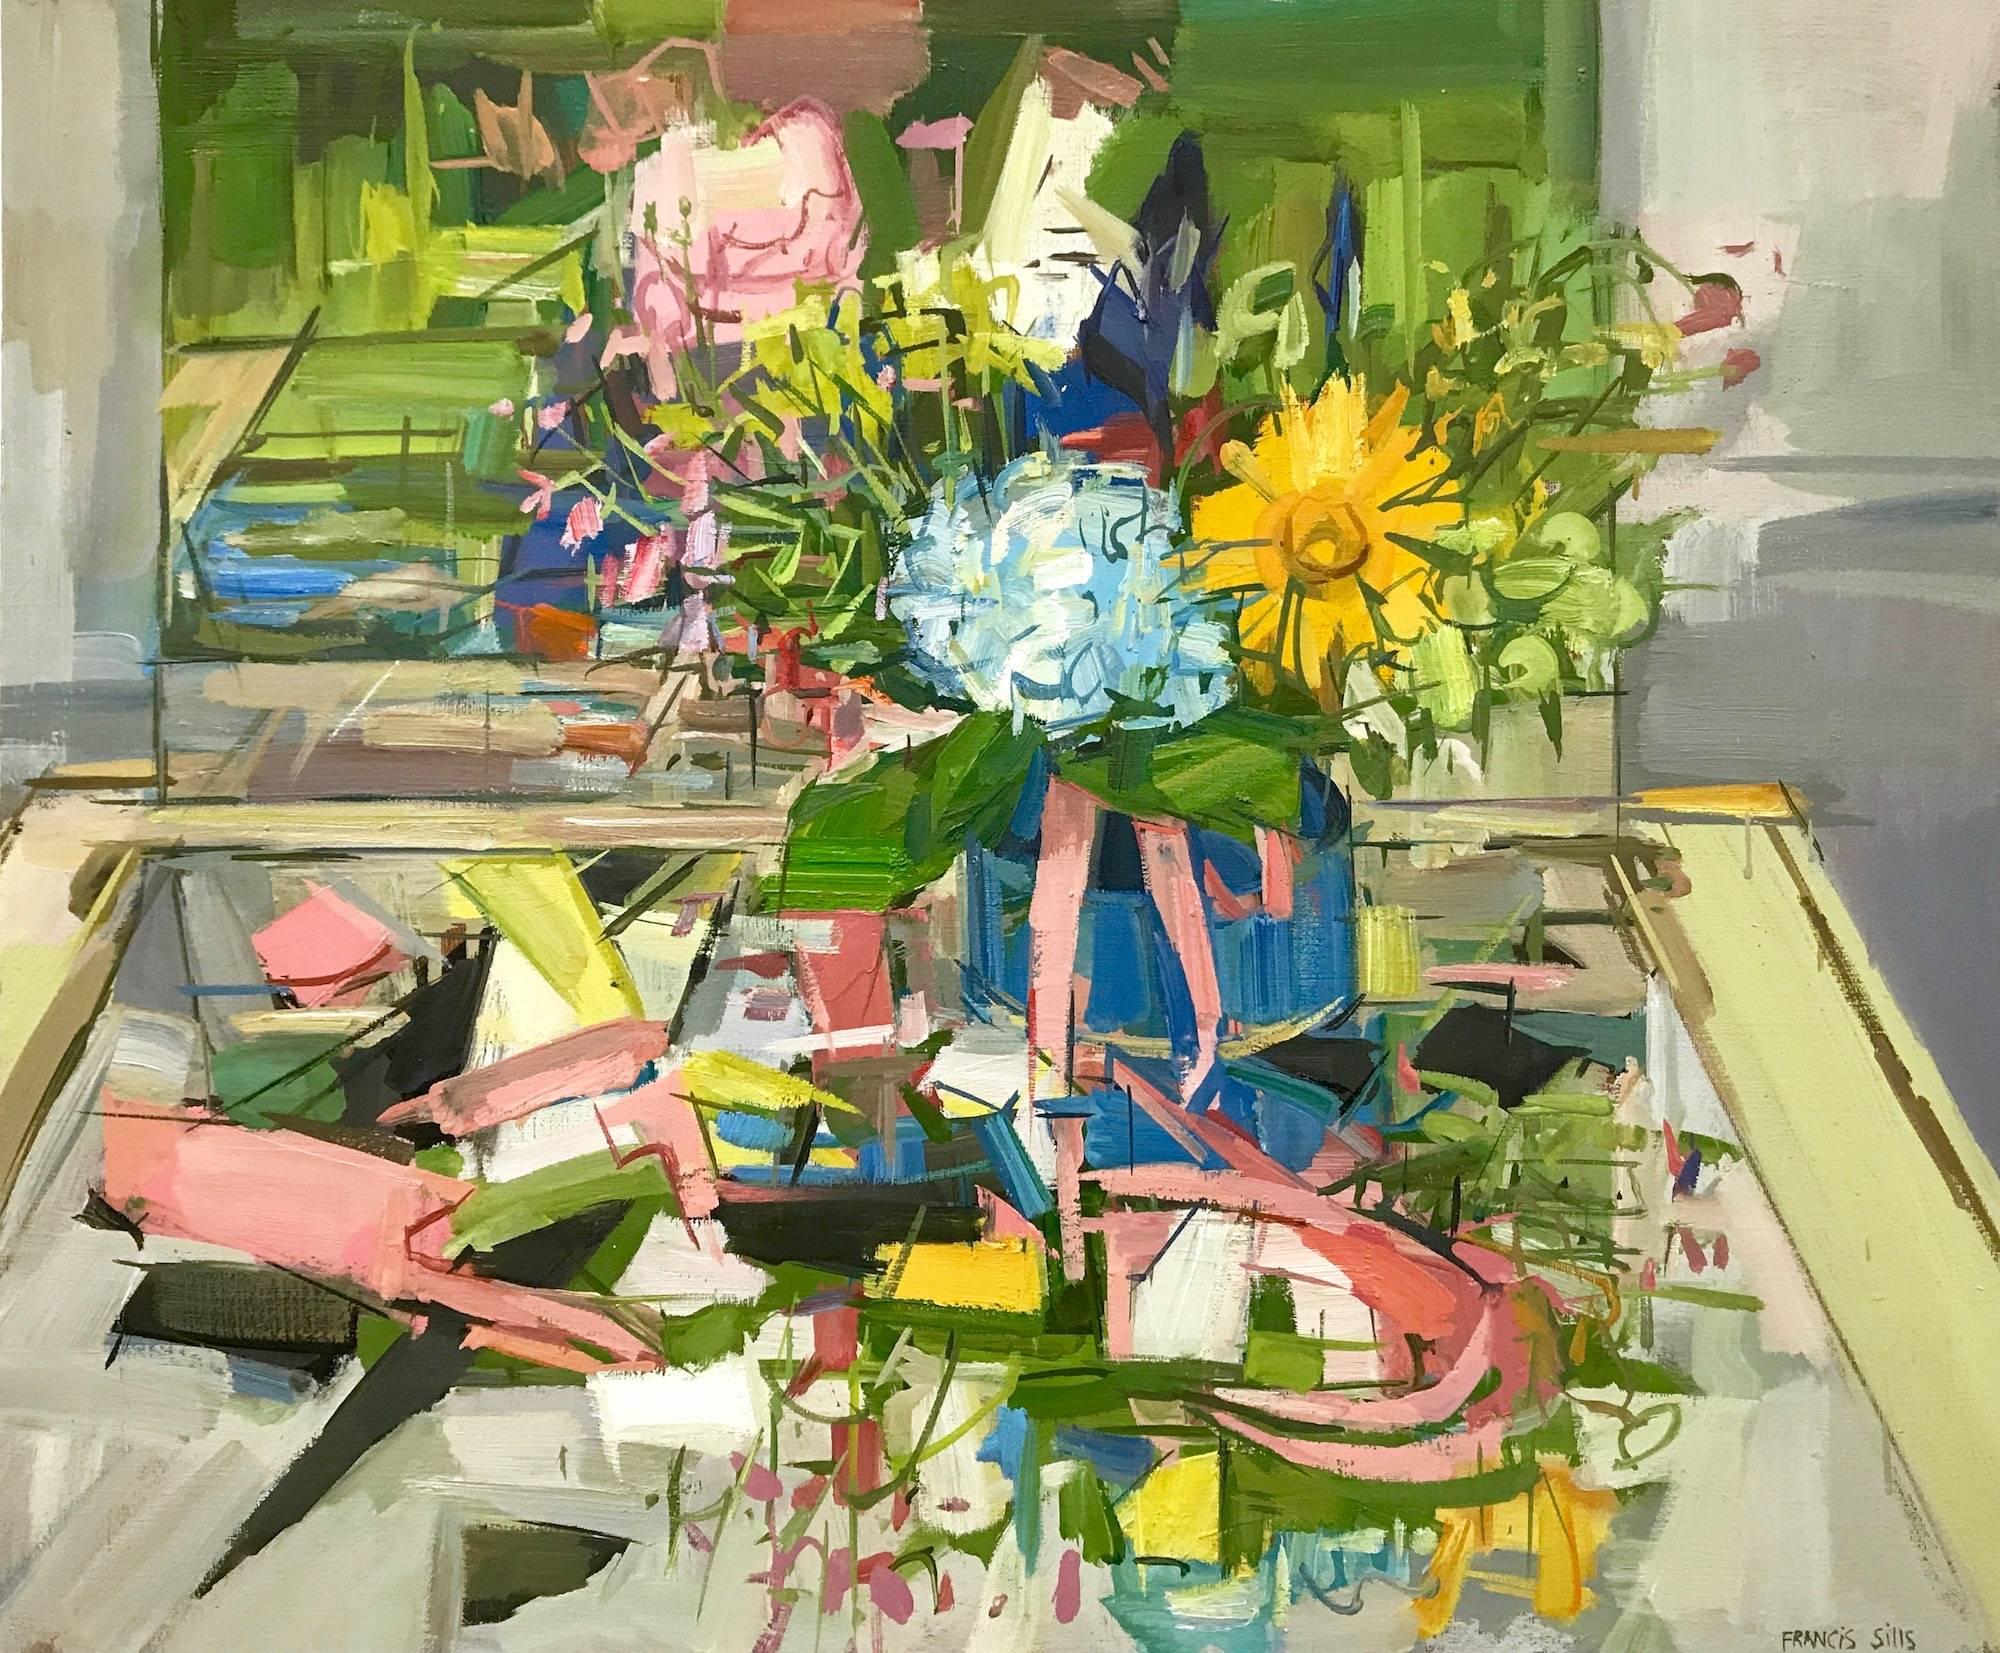 Francis Sills Still-Life Painting - Floral Still Life II, Yellow, Blue, Pink and Green Flowers in Vase on Table